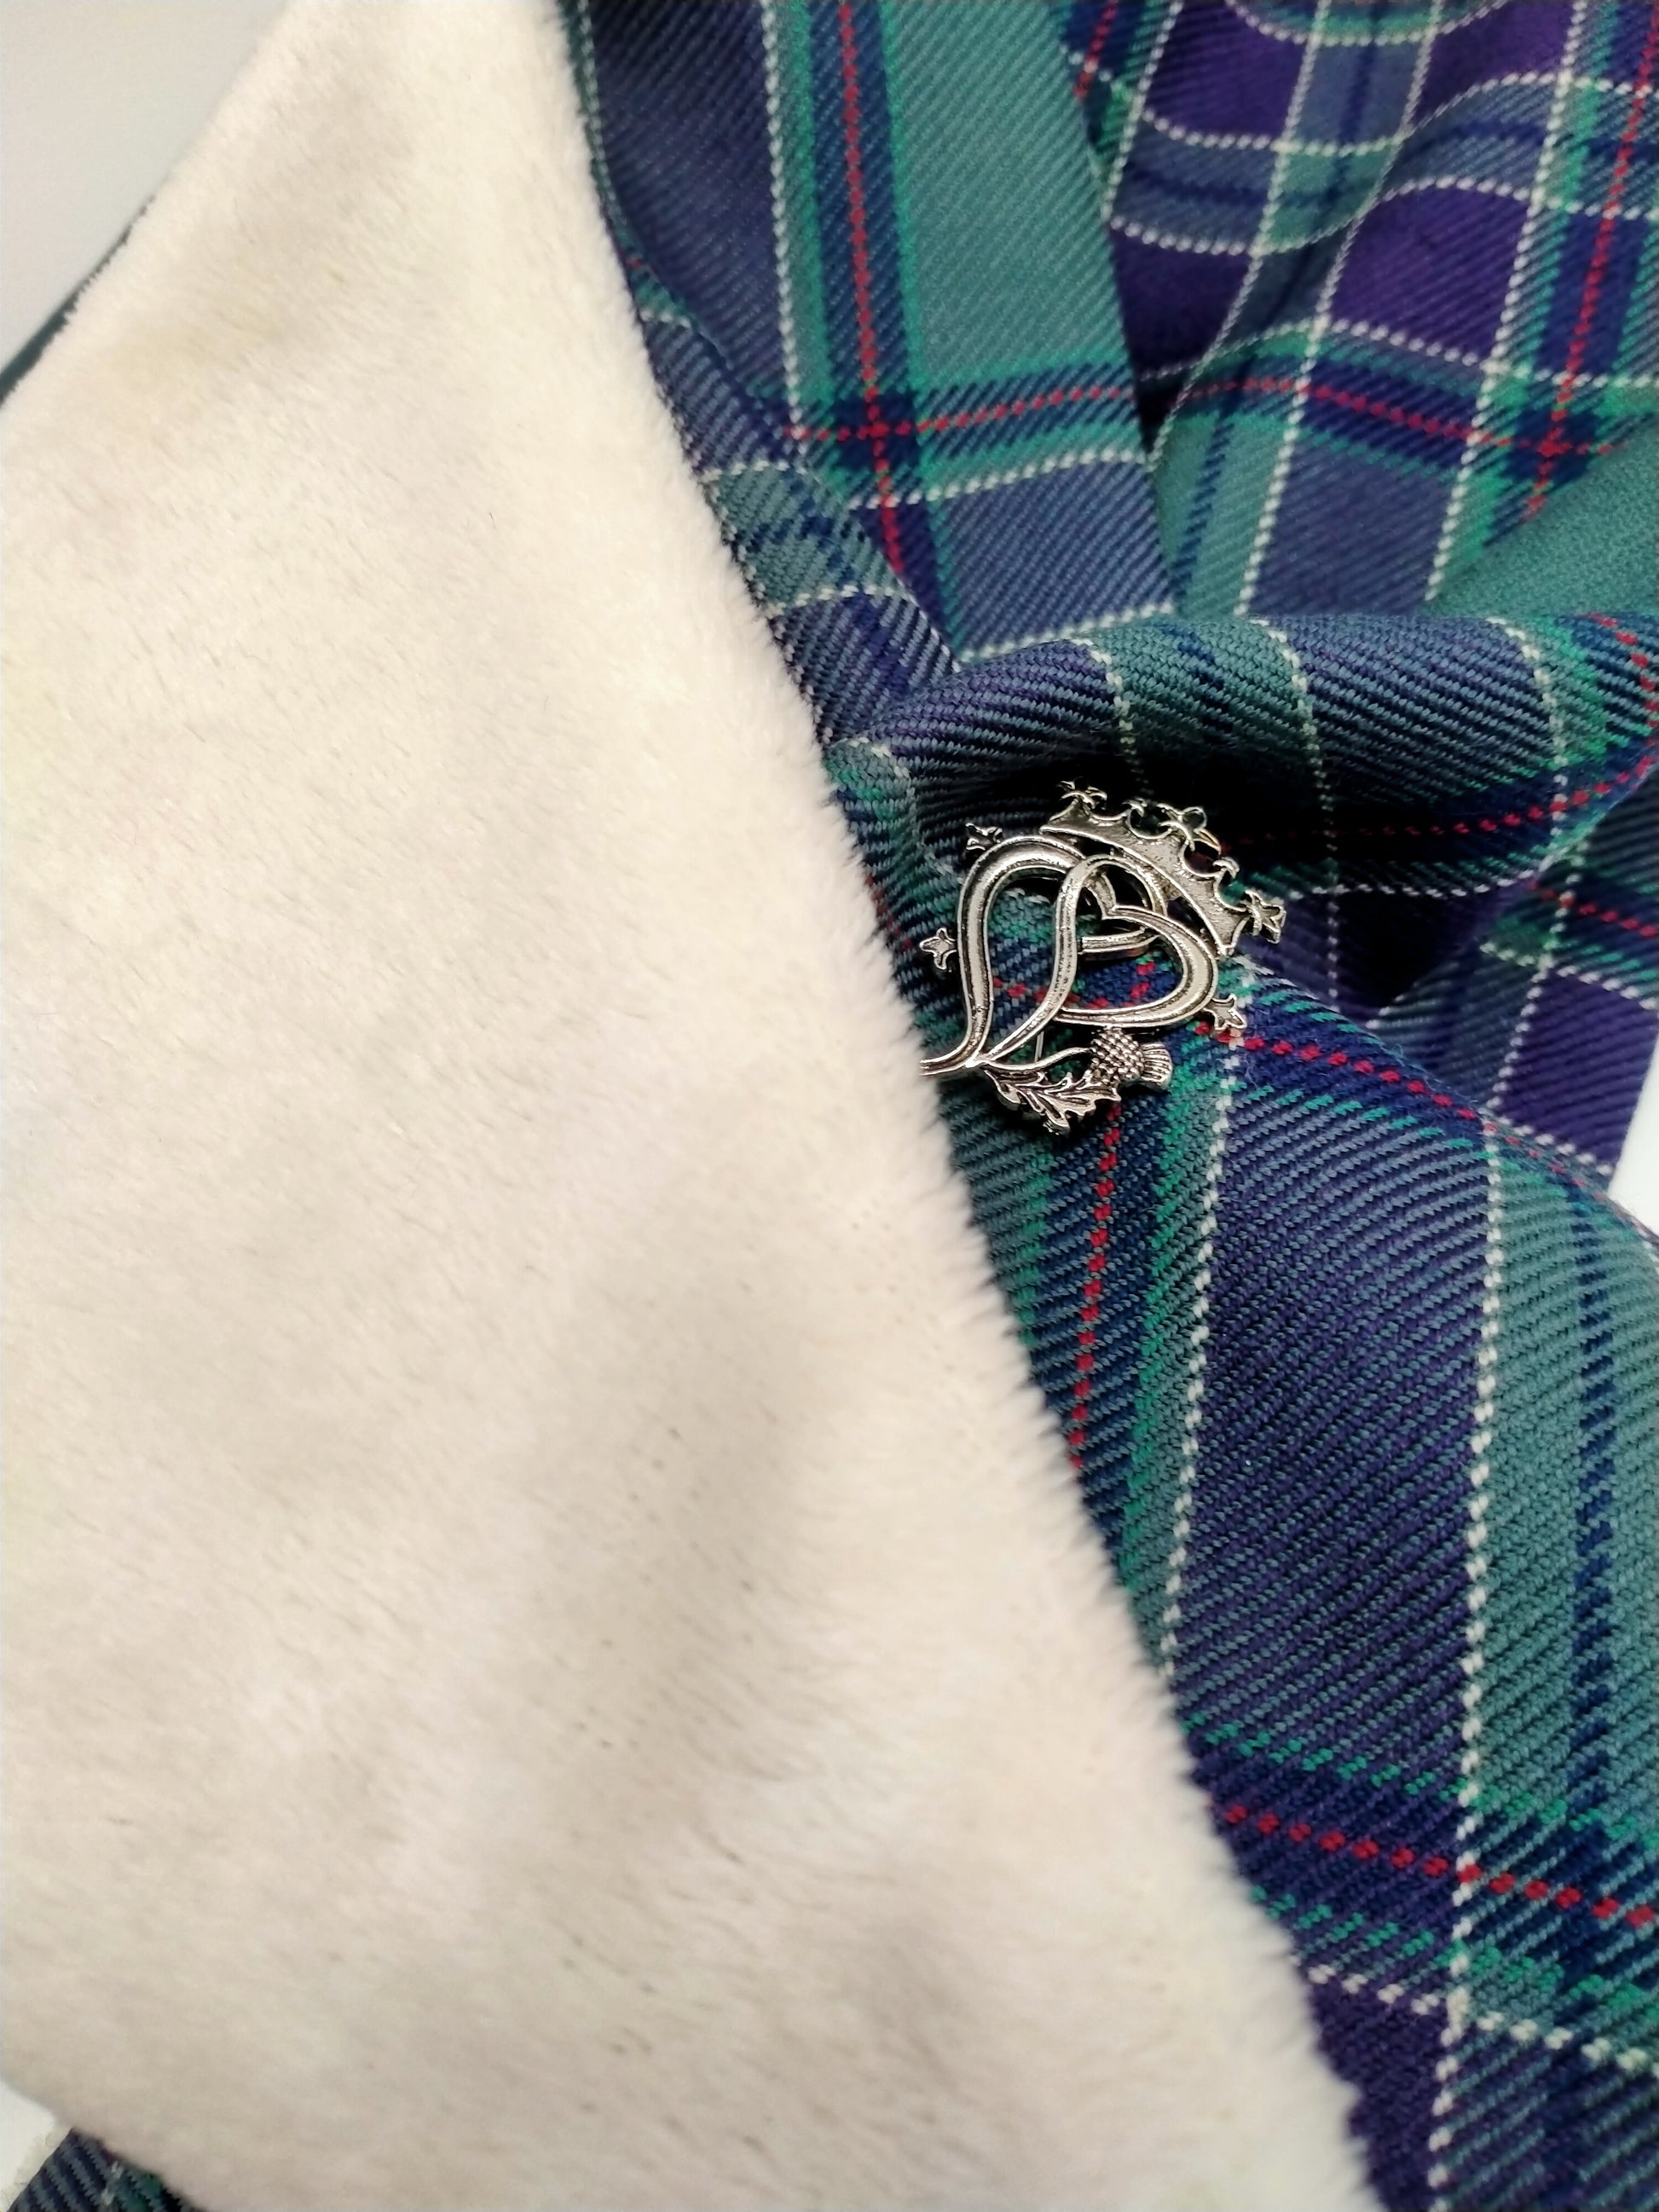 Close up photo of the woollen tartan fabric, the fleece lining and the brooch.